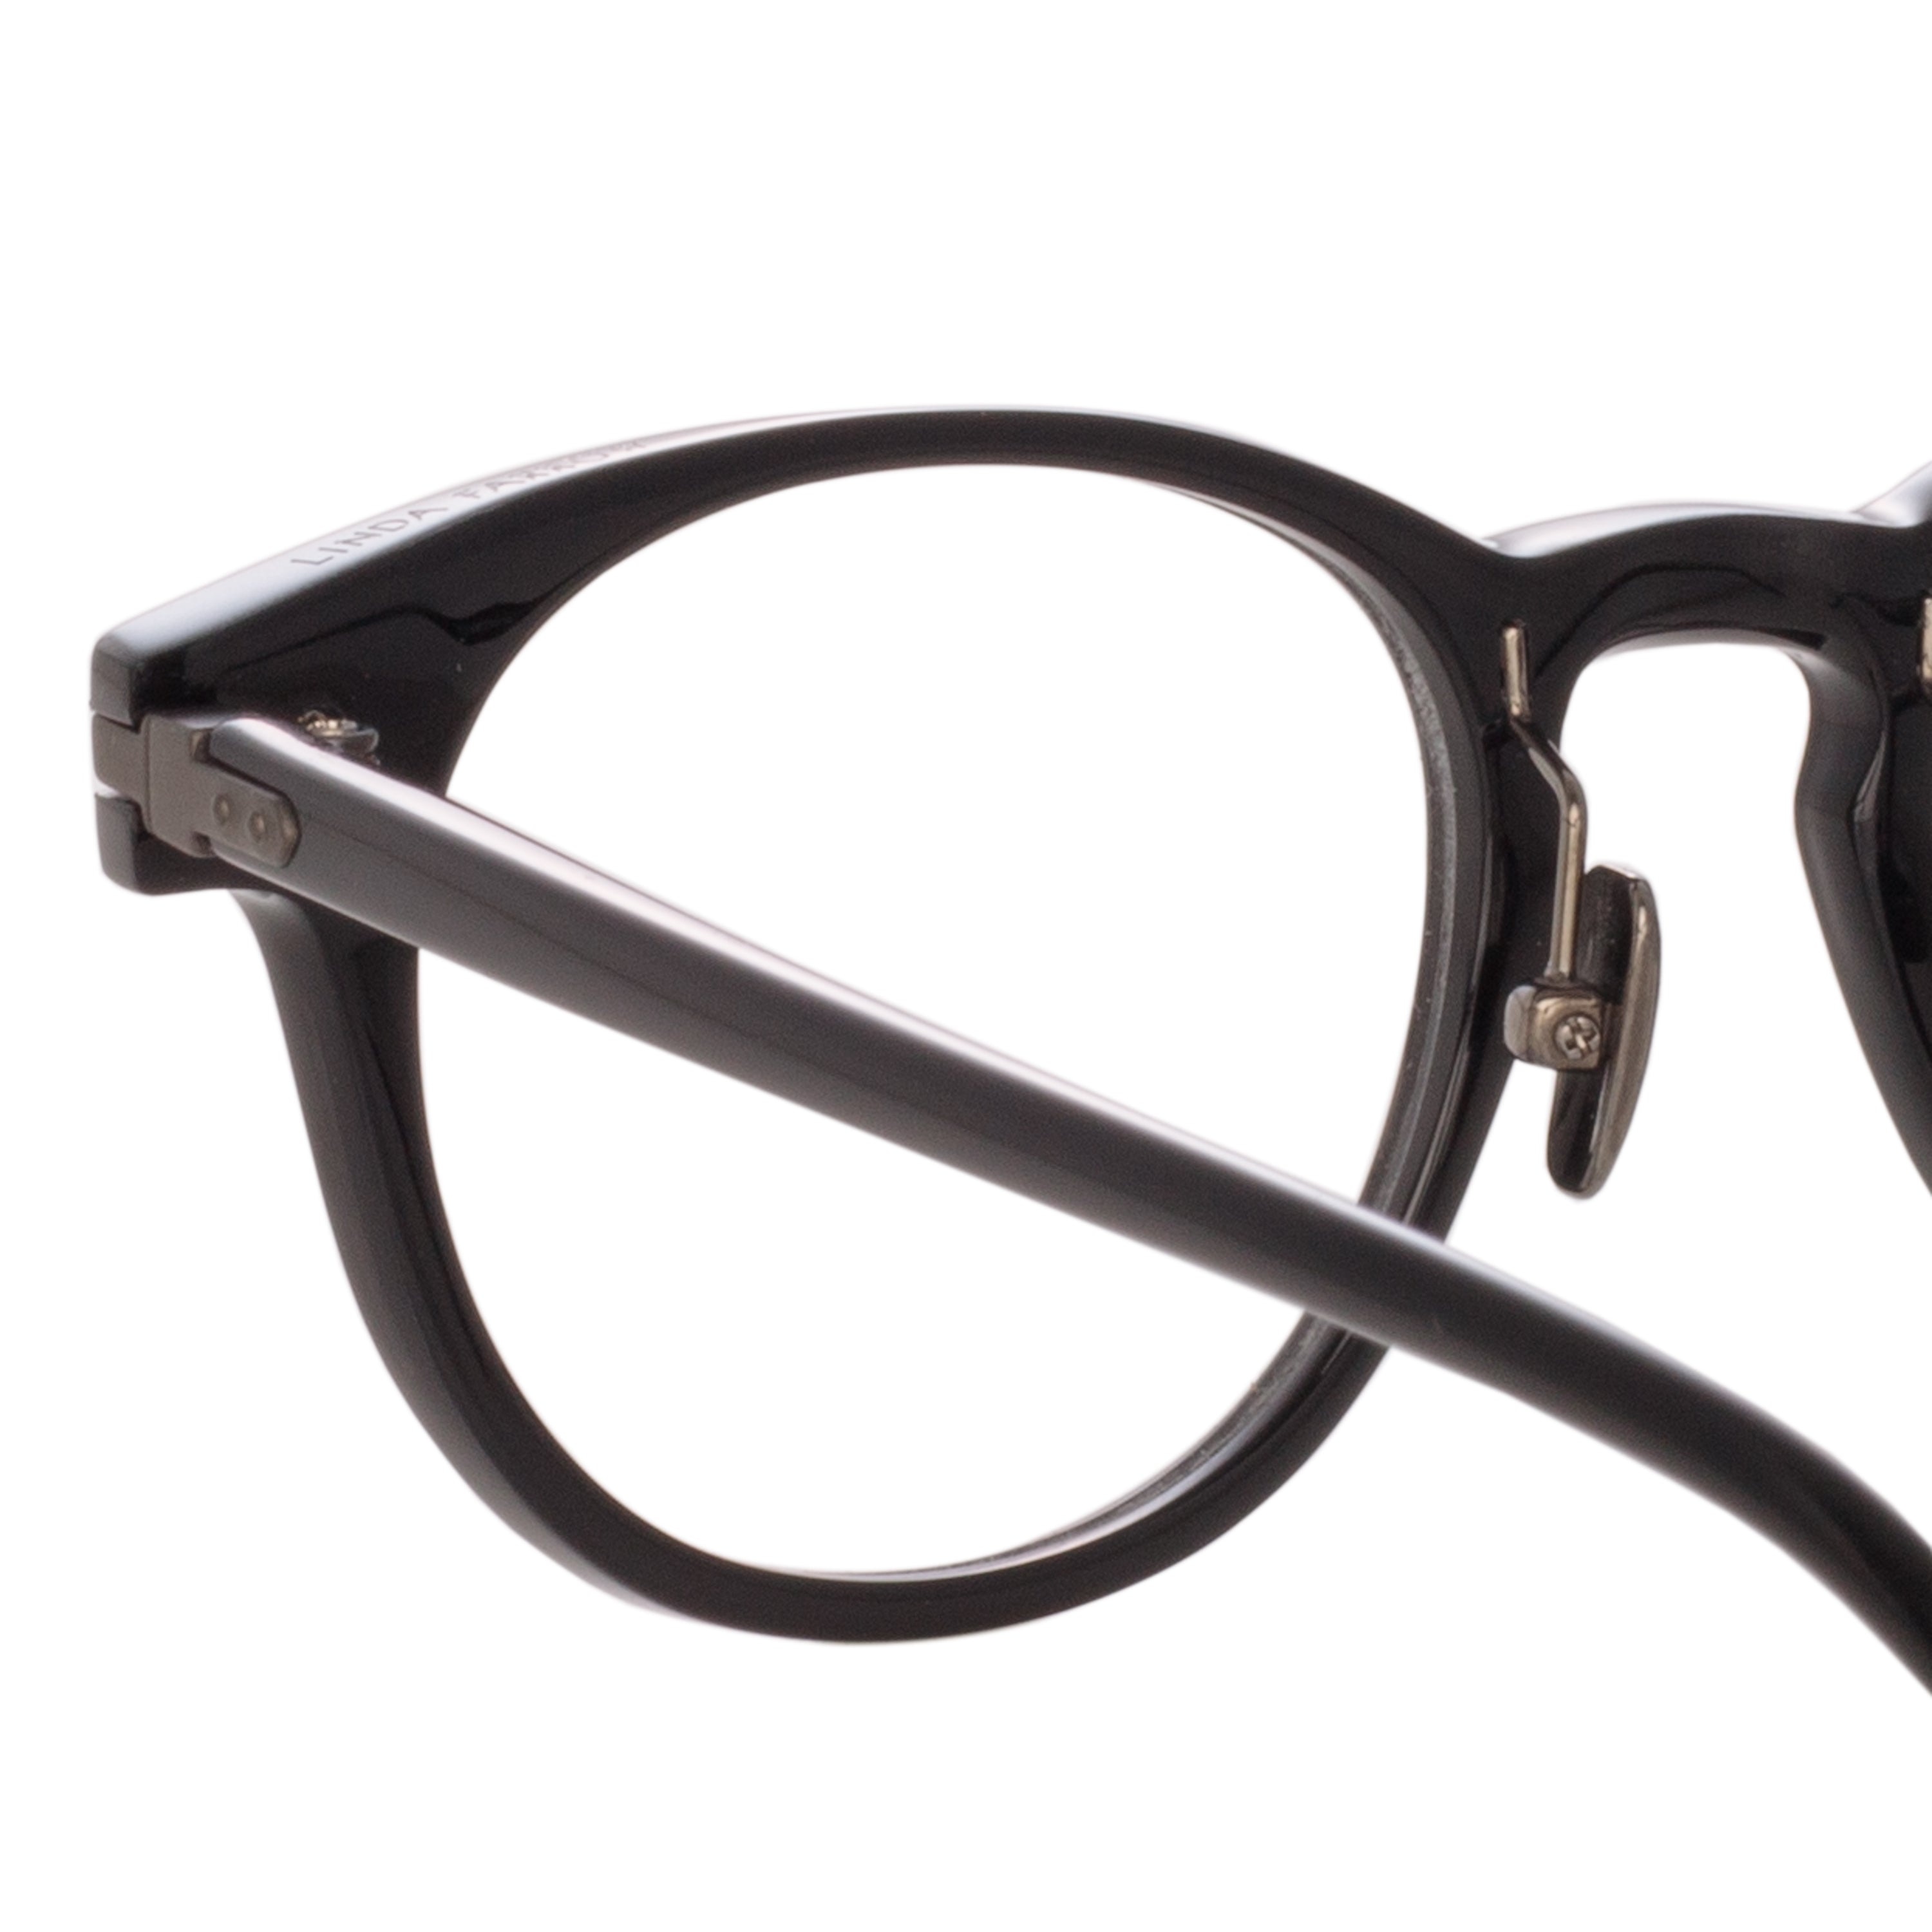 BAY OPTICAL D-FRAME IN BLACK AND NICKEL (ASIAN FIT) - 5